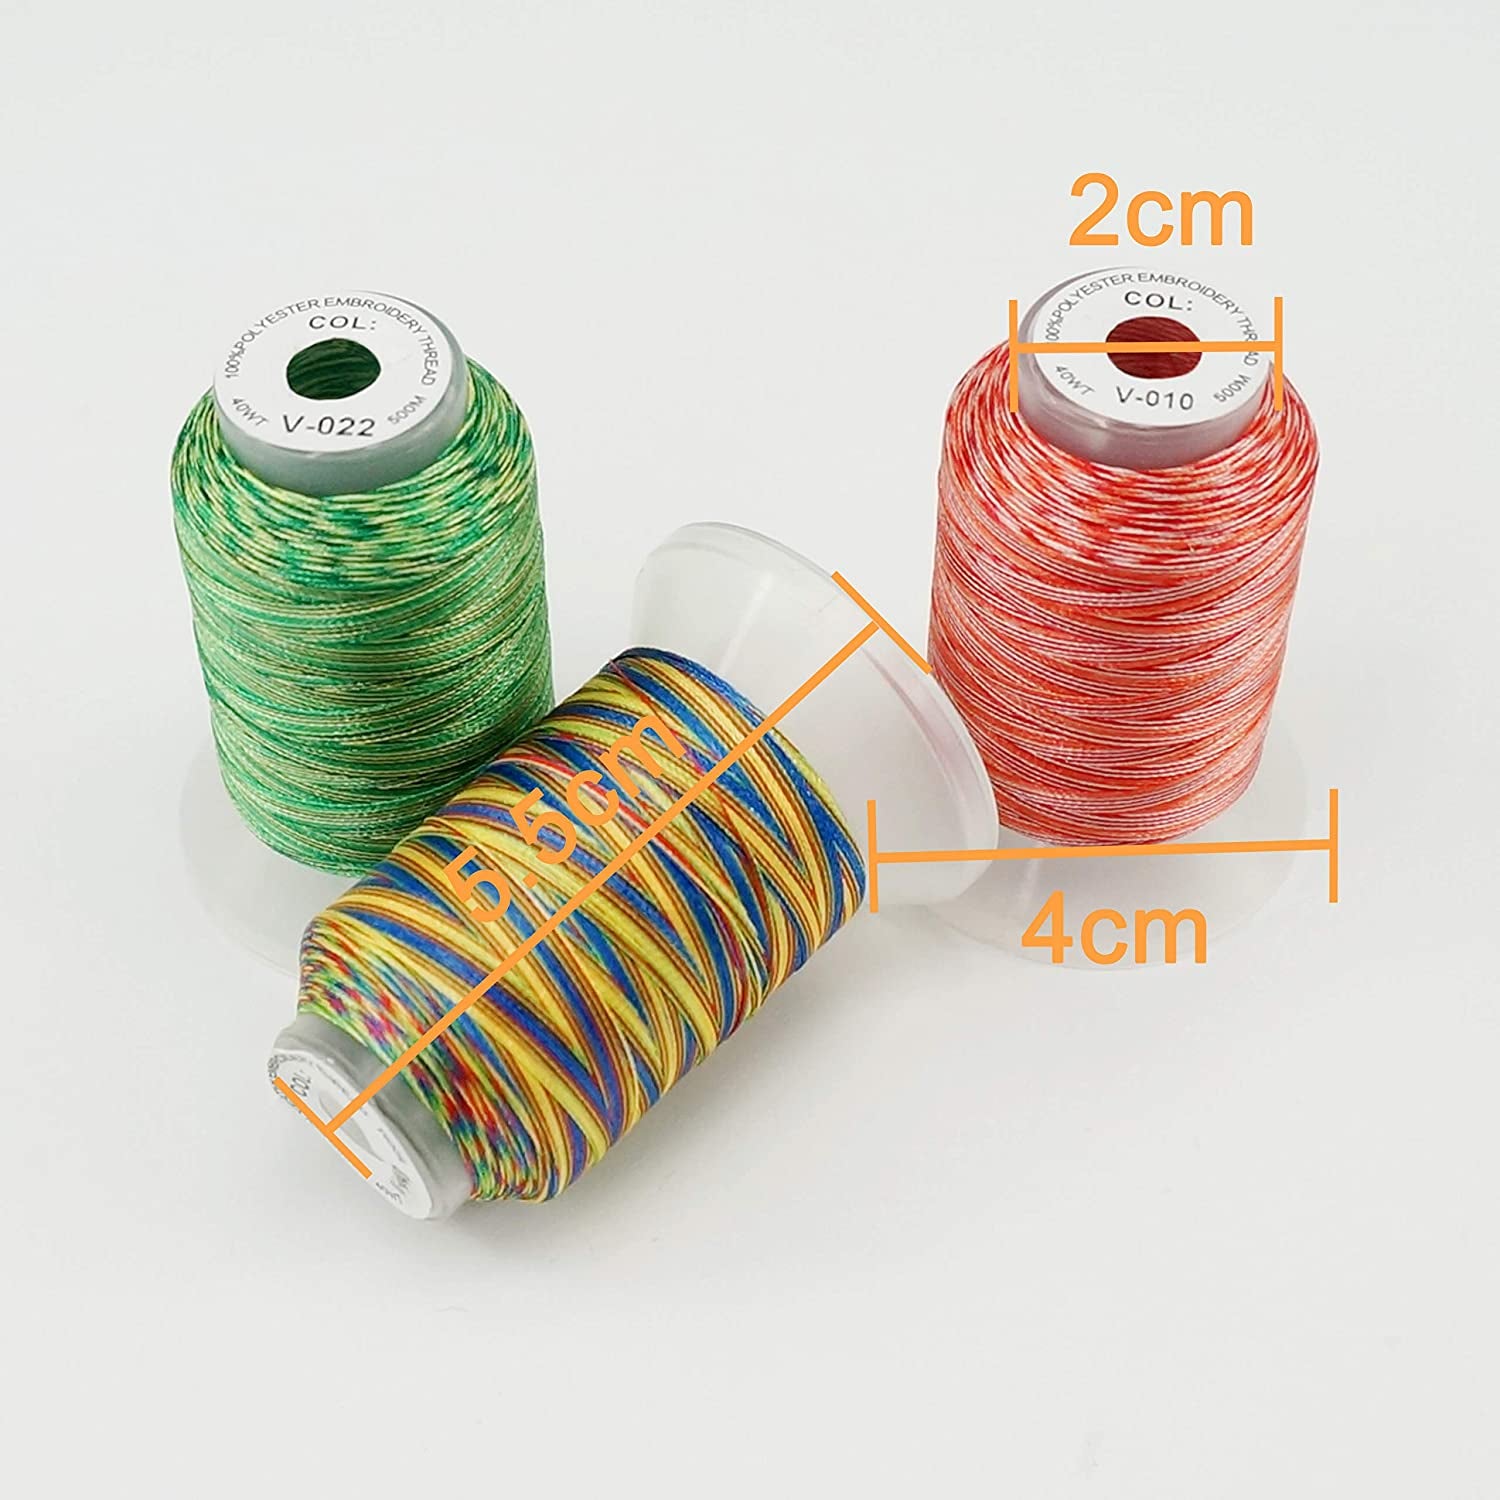 12 Colors Variegated Polyester Embroidery Machine Thread Kit 500M (550Y) Each Spool for Brother Janome Babylock Singer Pfaff Bernina Husqvaran Embroidery and Sewing Machines-Assortment1